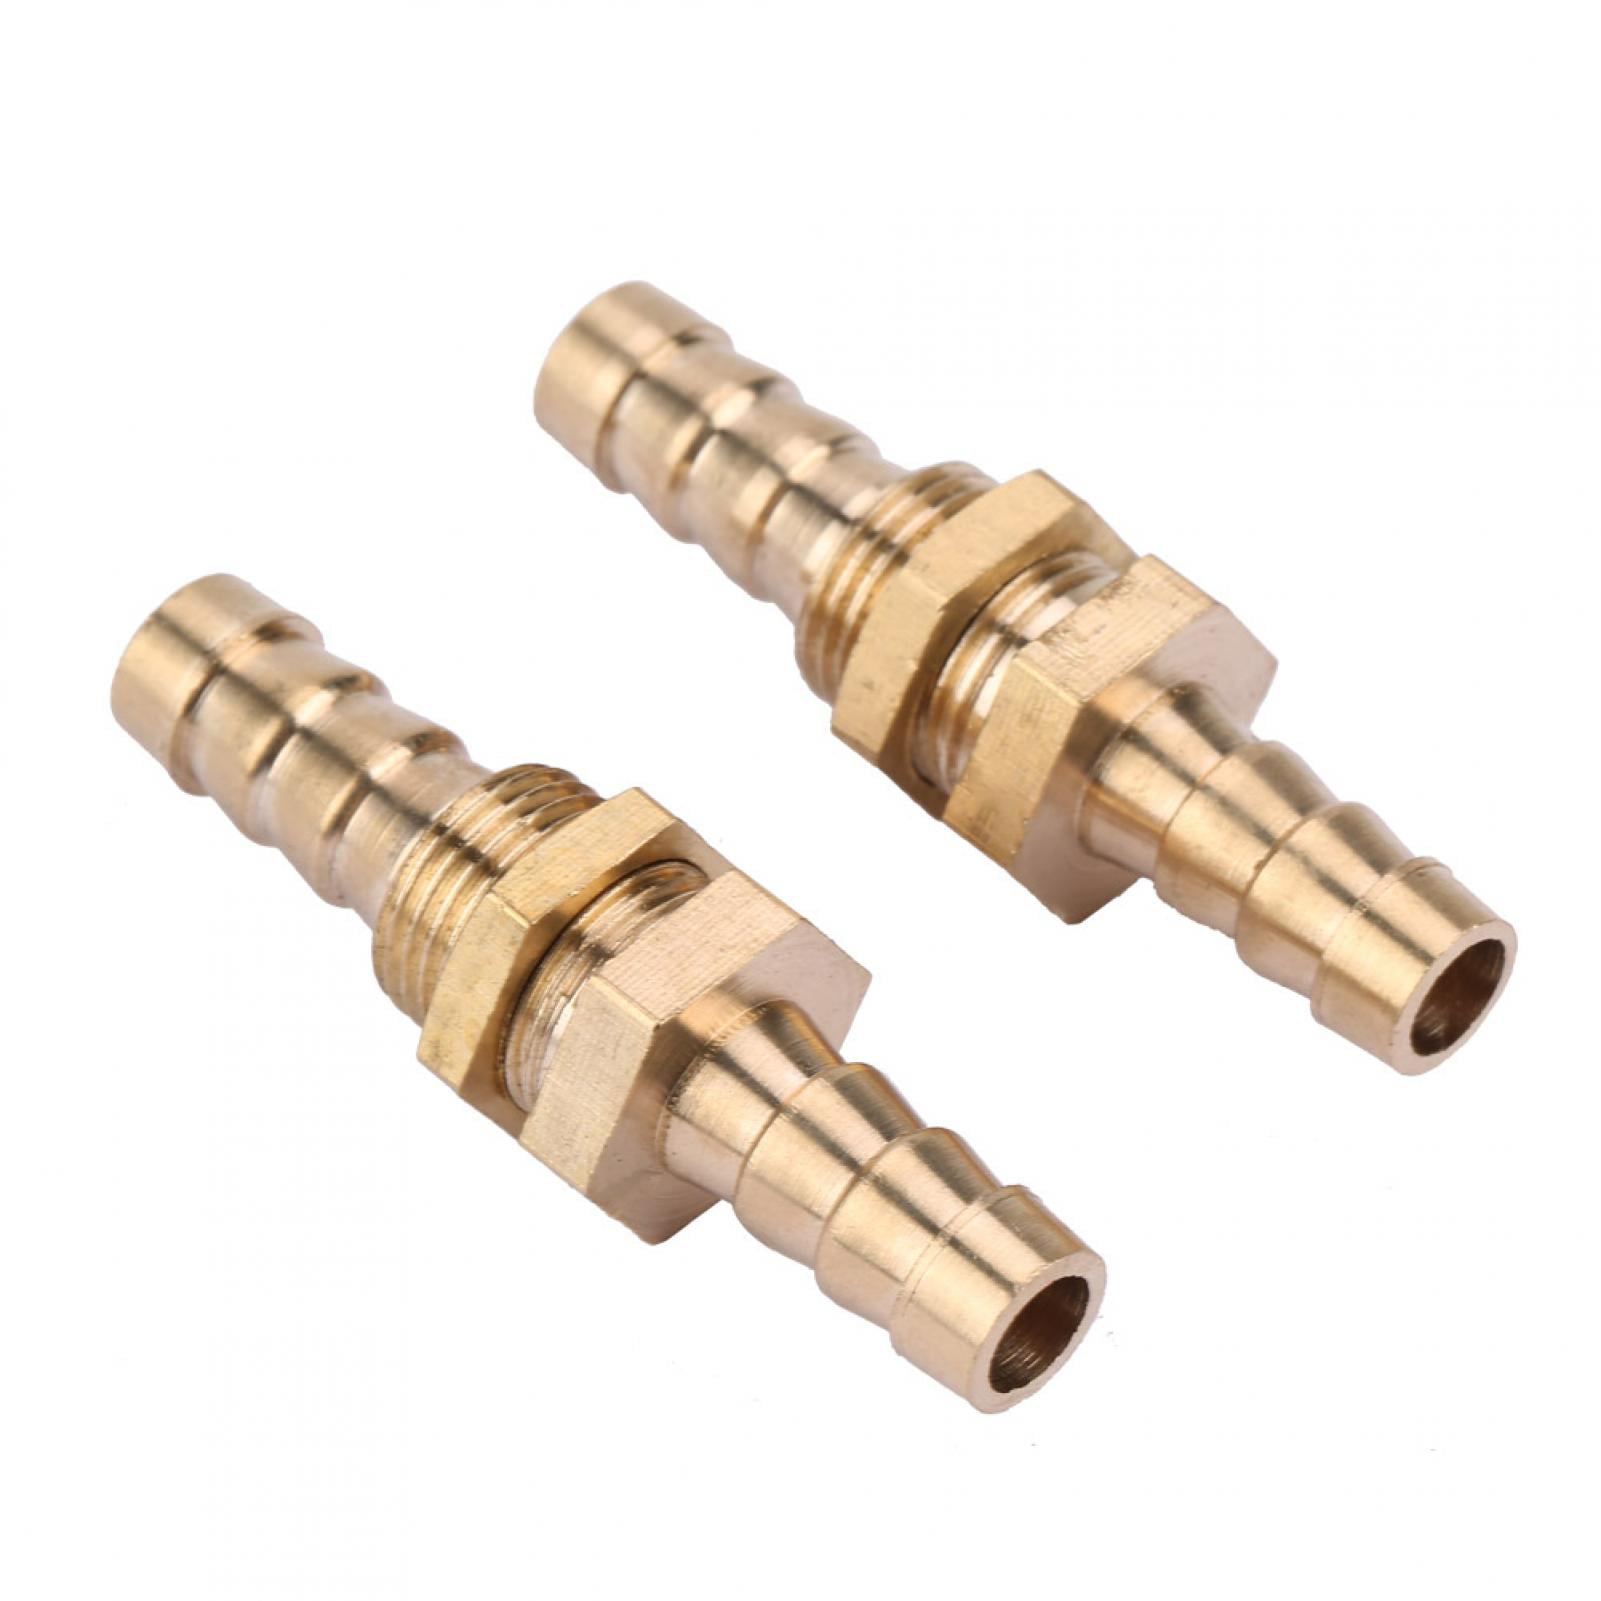 1/2" 12mm Hose Tail Bulkhead Connector in Brass for Fuel Air Water Etc 